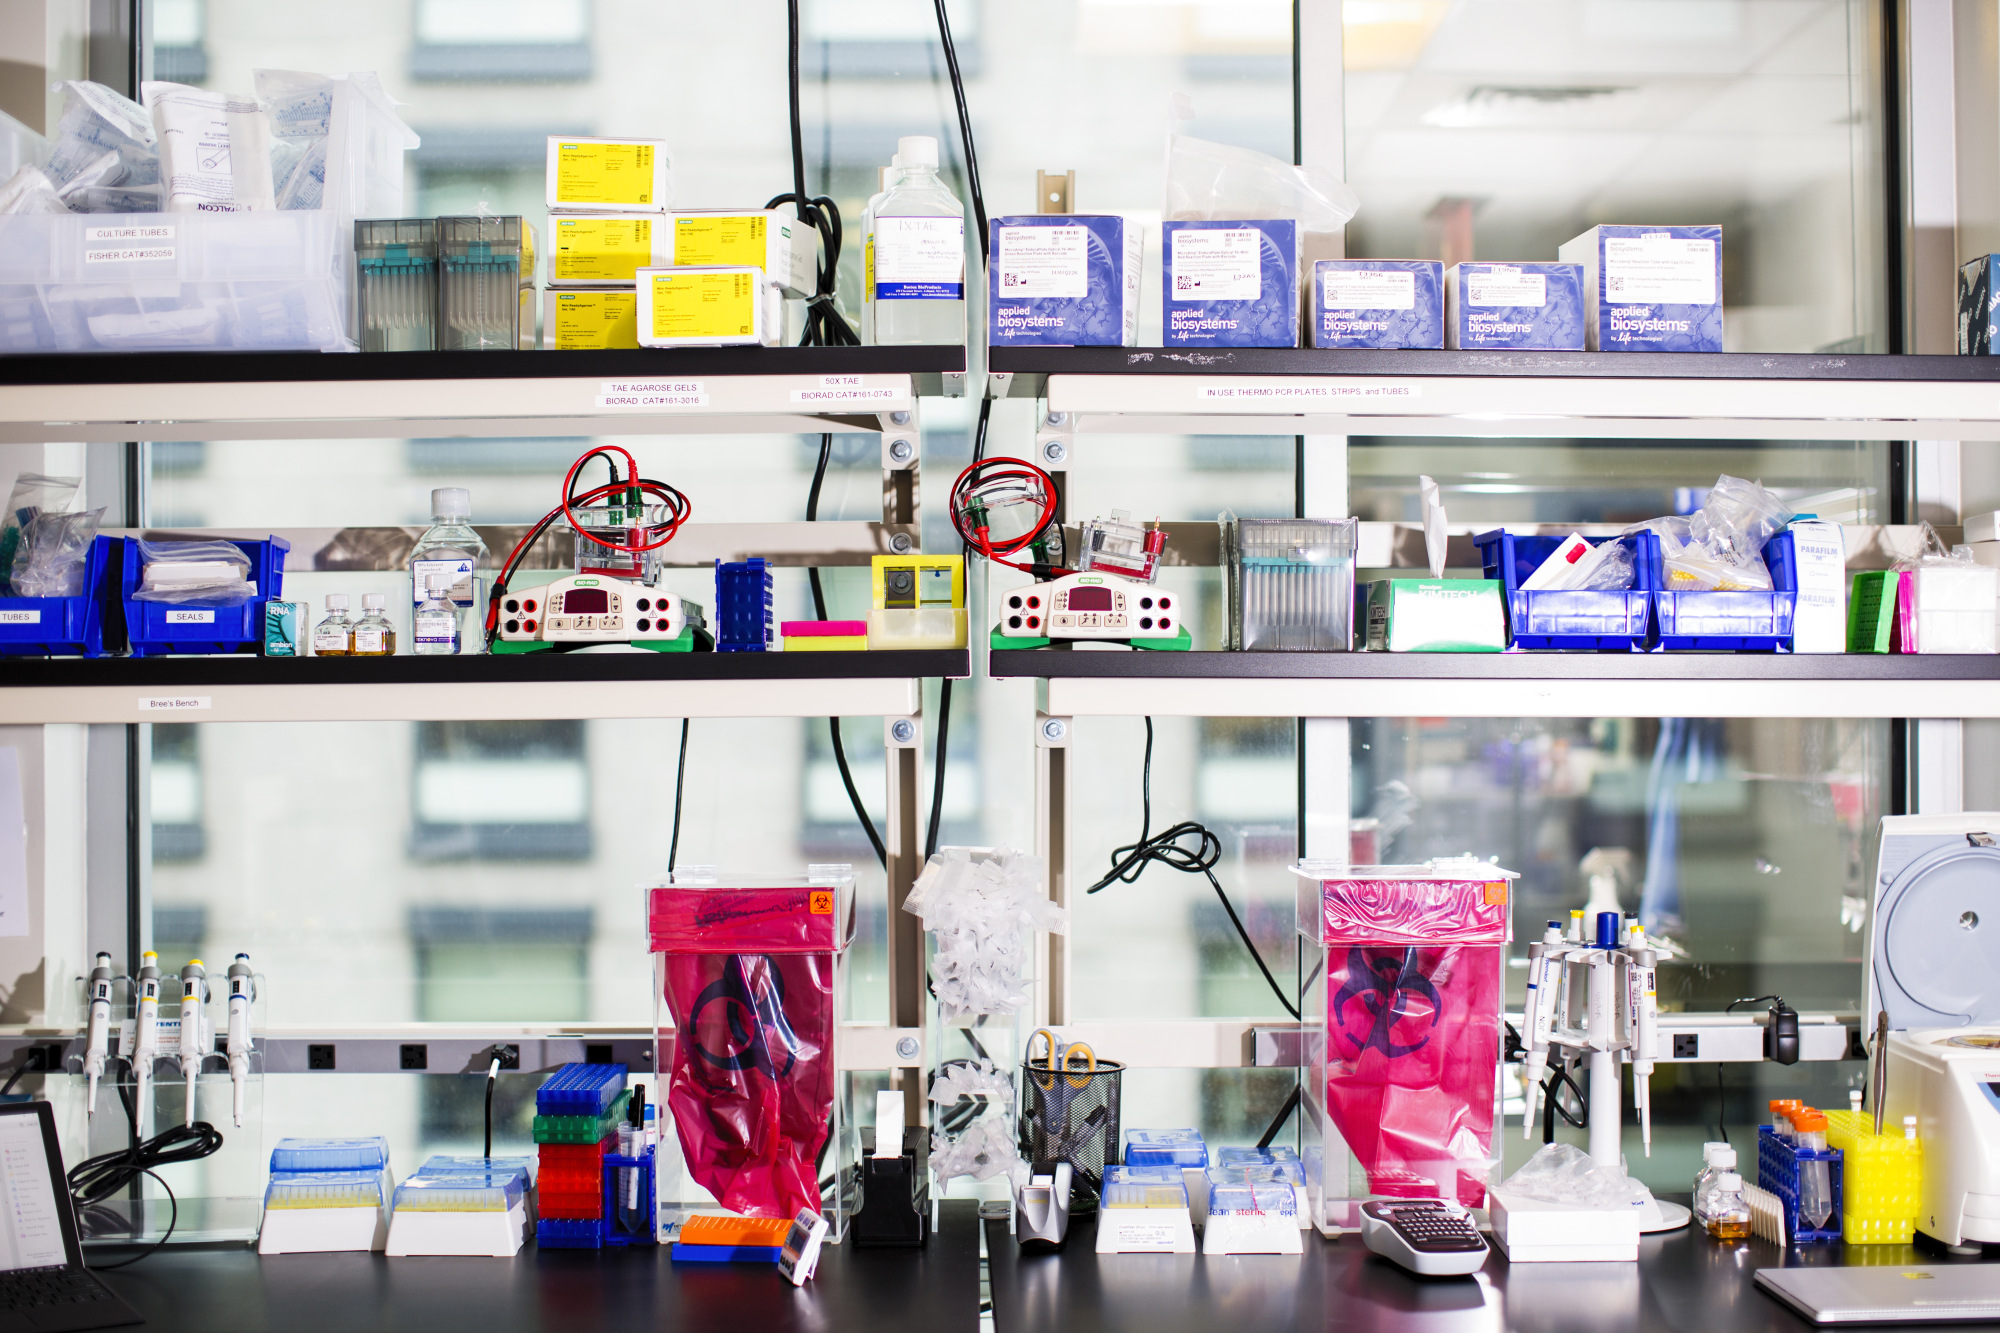 Laboratory equipment sits on shelves at the Moderna Therapeutics facility in Cambridge, Massachusetts.